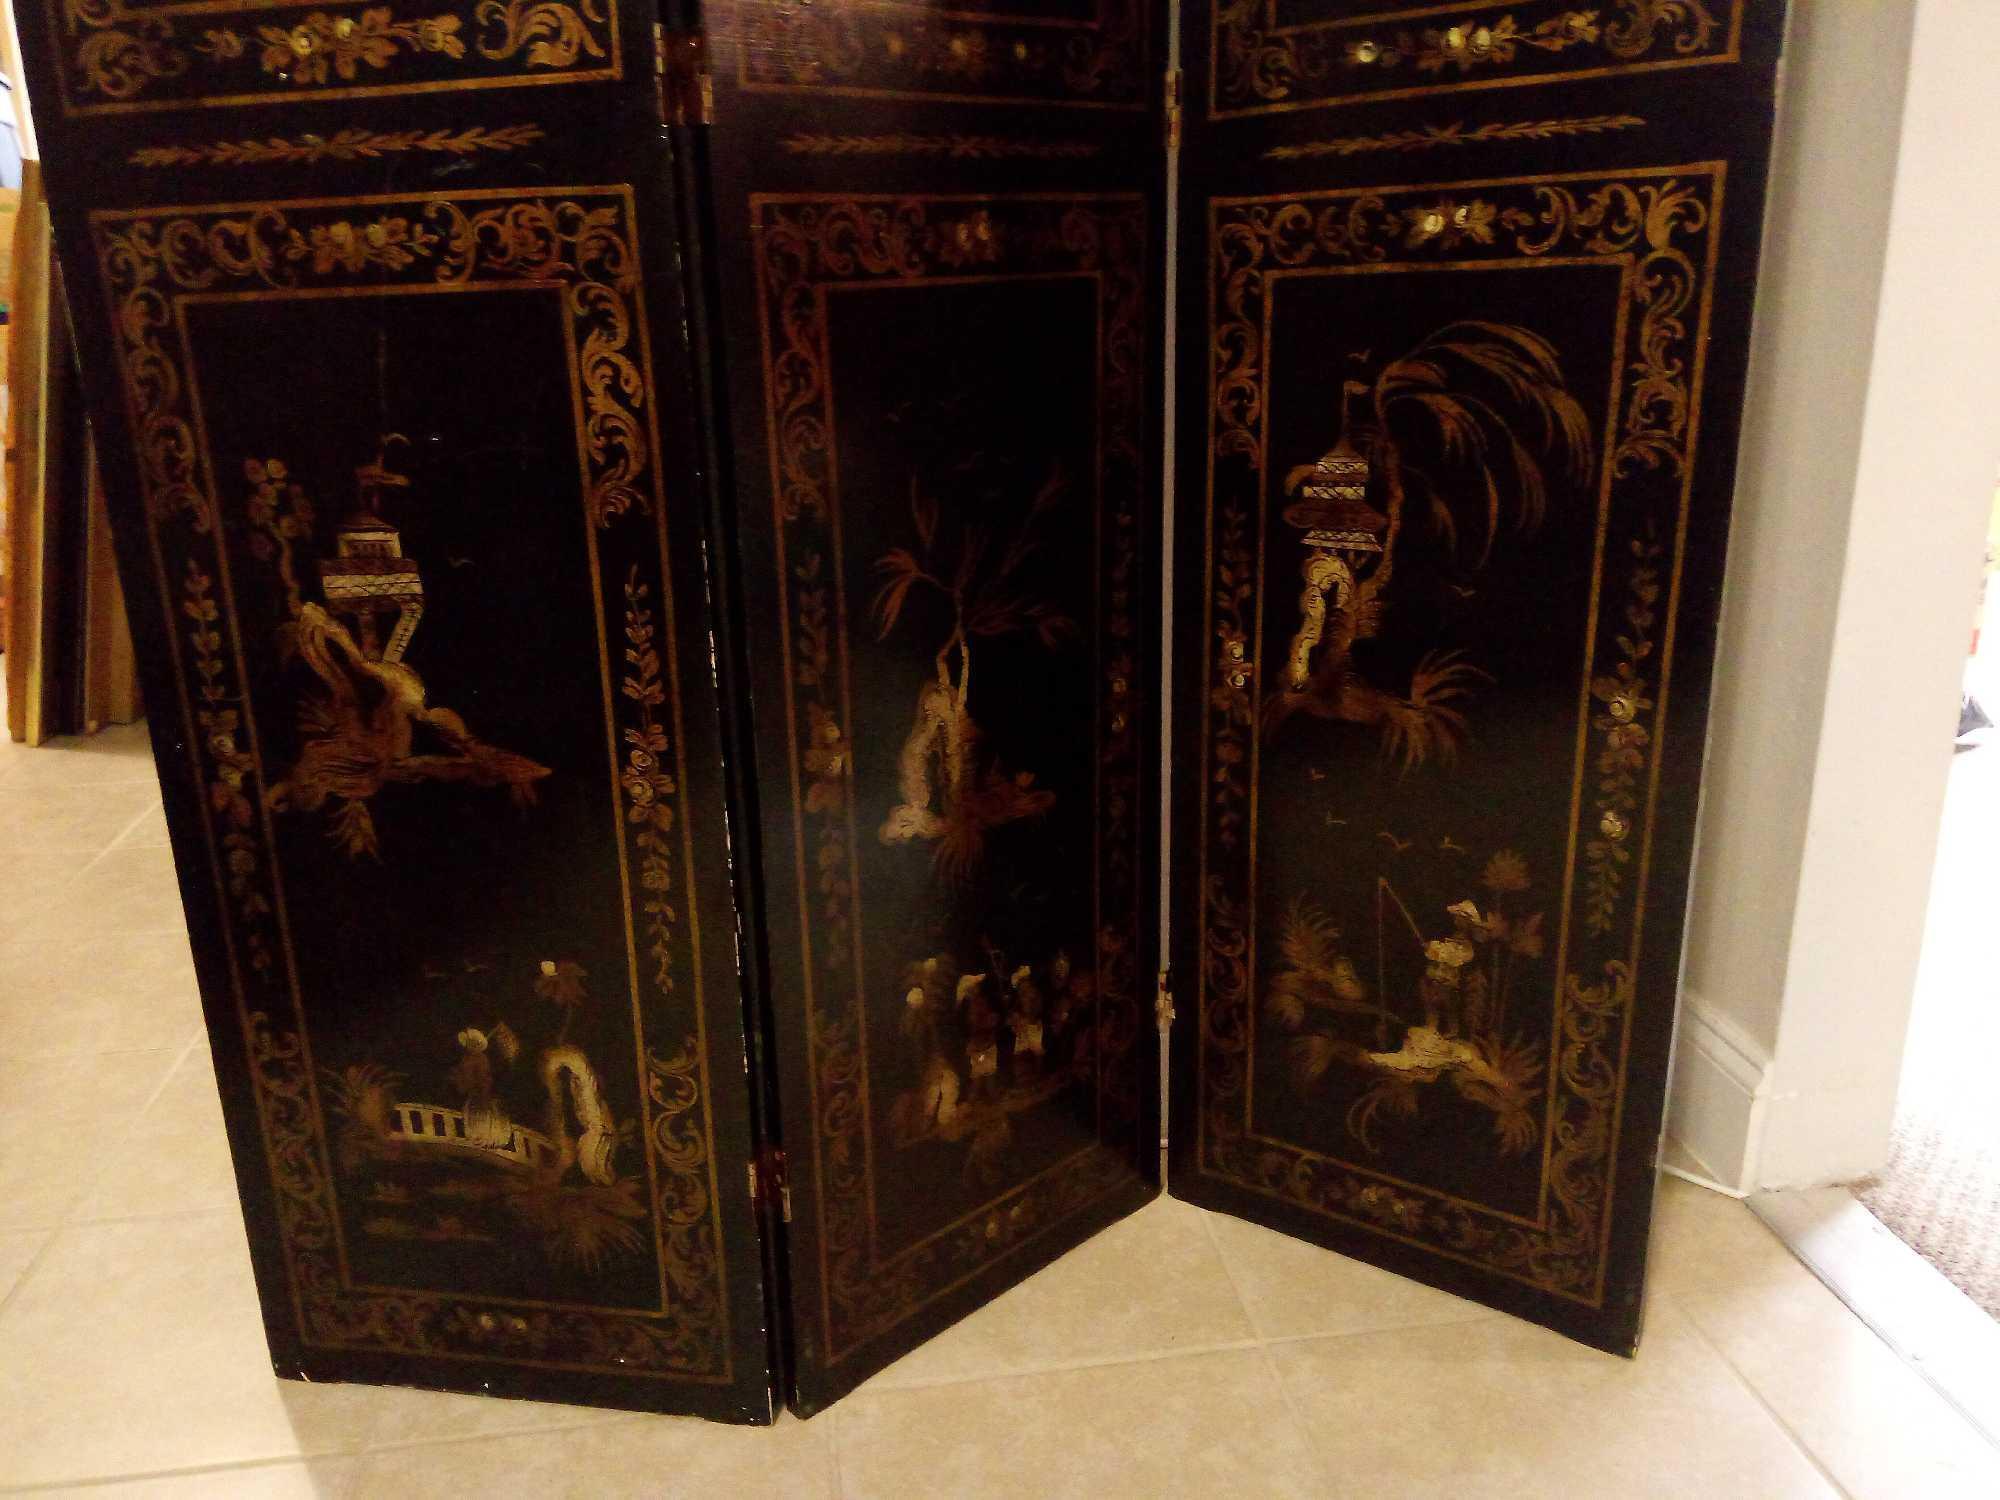 3 PANEL LACQUERED EAST ASIAN STYLE ROOM DIVIDER